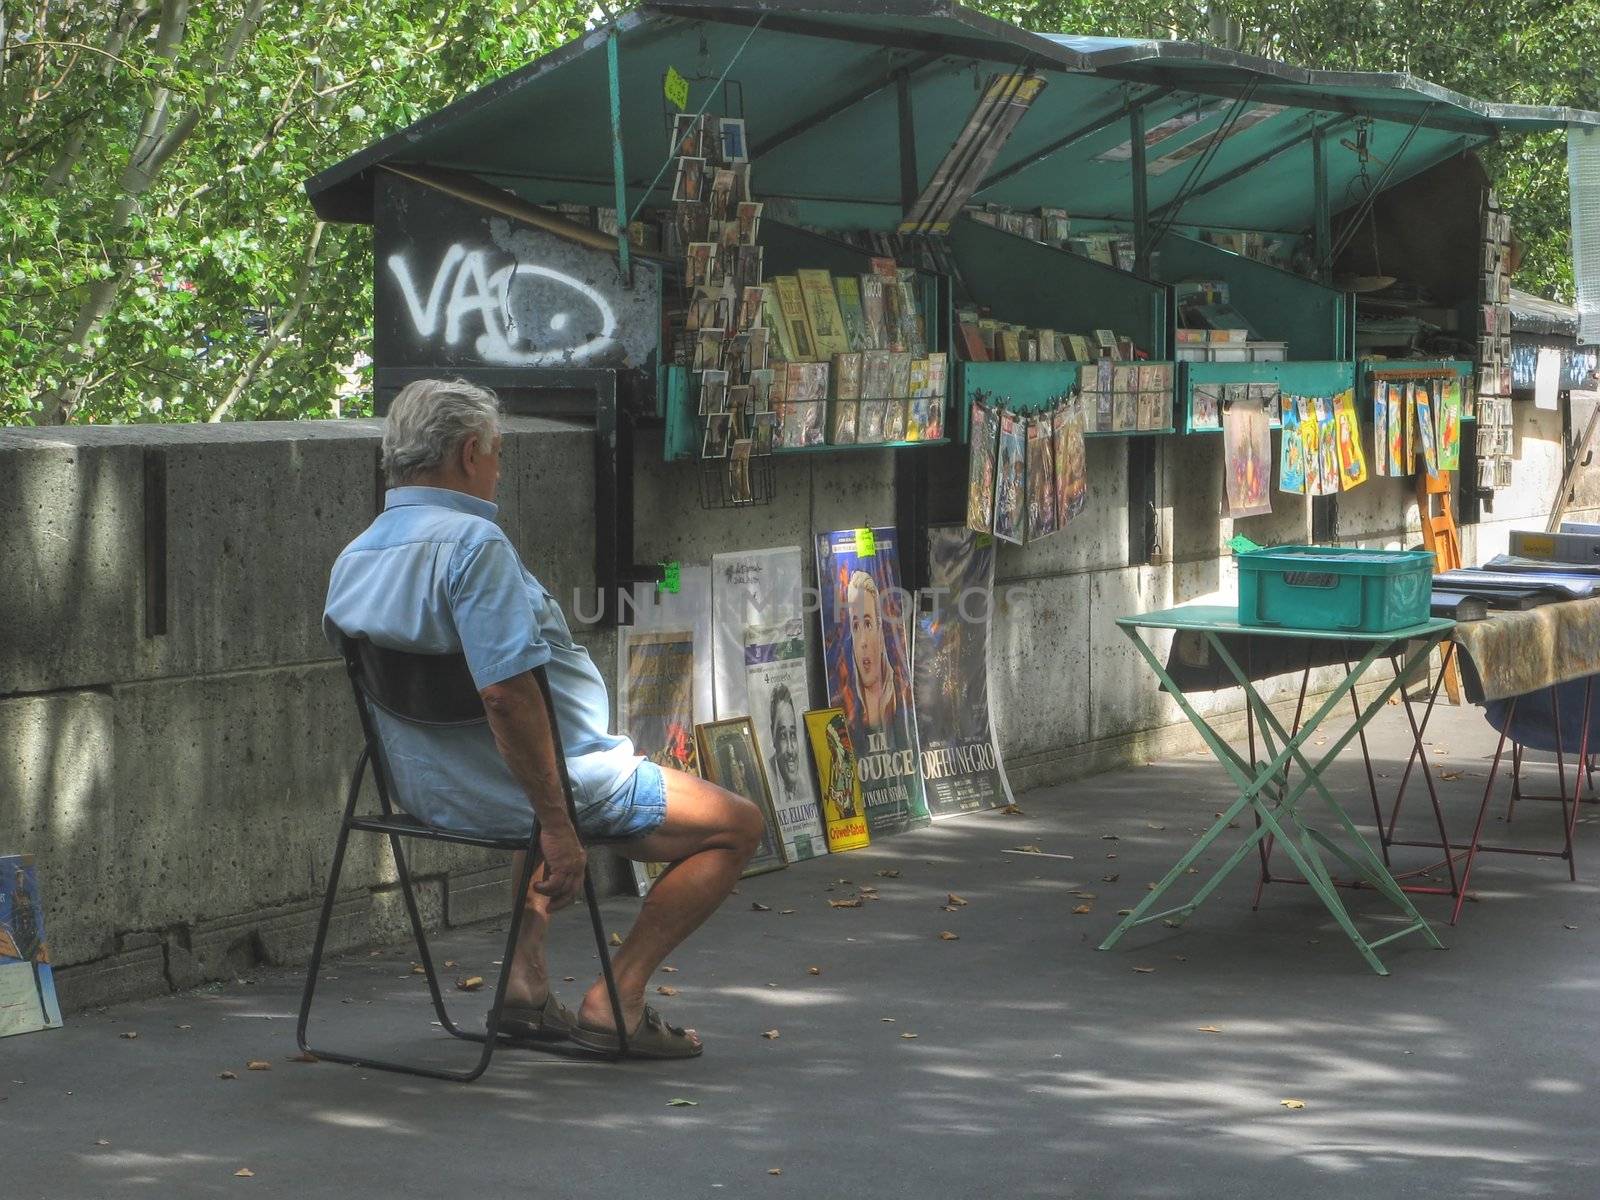 Parisian bookseller on the quays of the Seine river